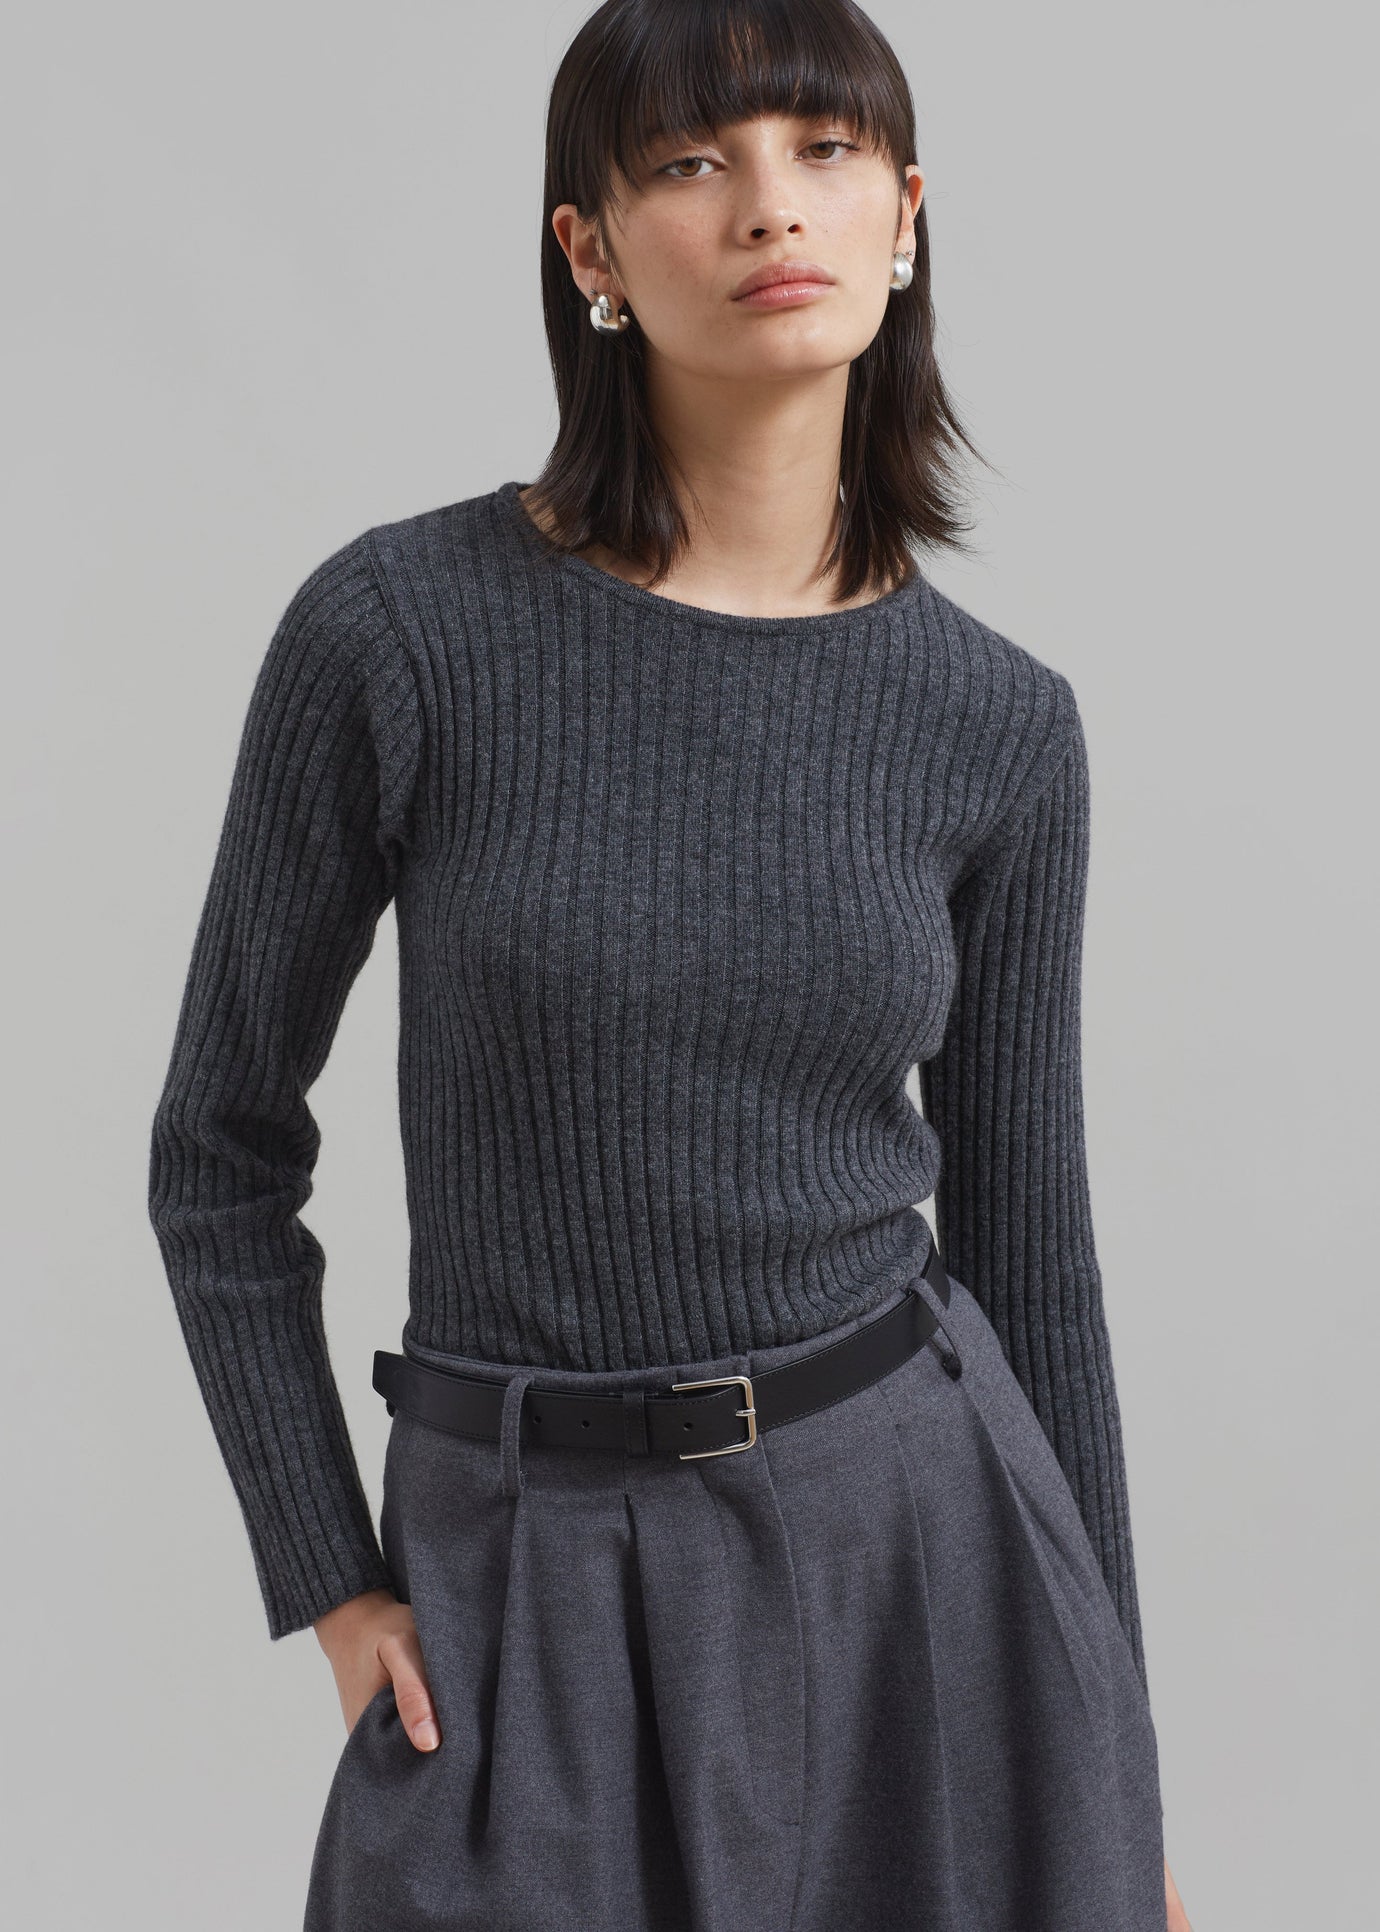 Cora Ribbed Sweater - Charcoal